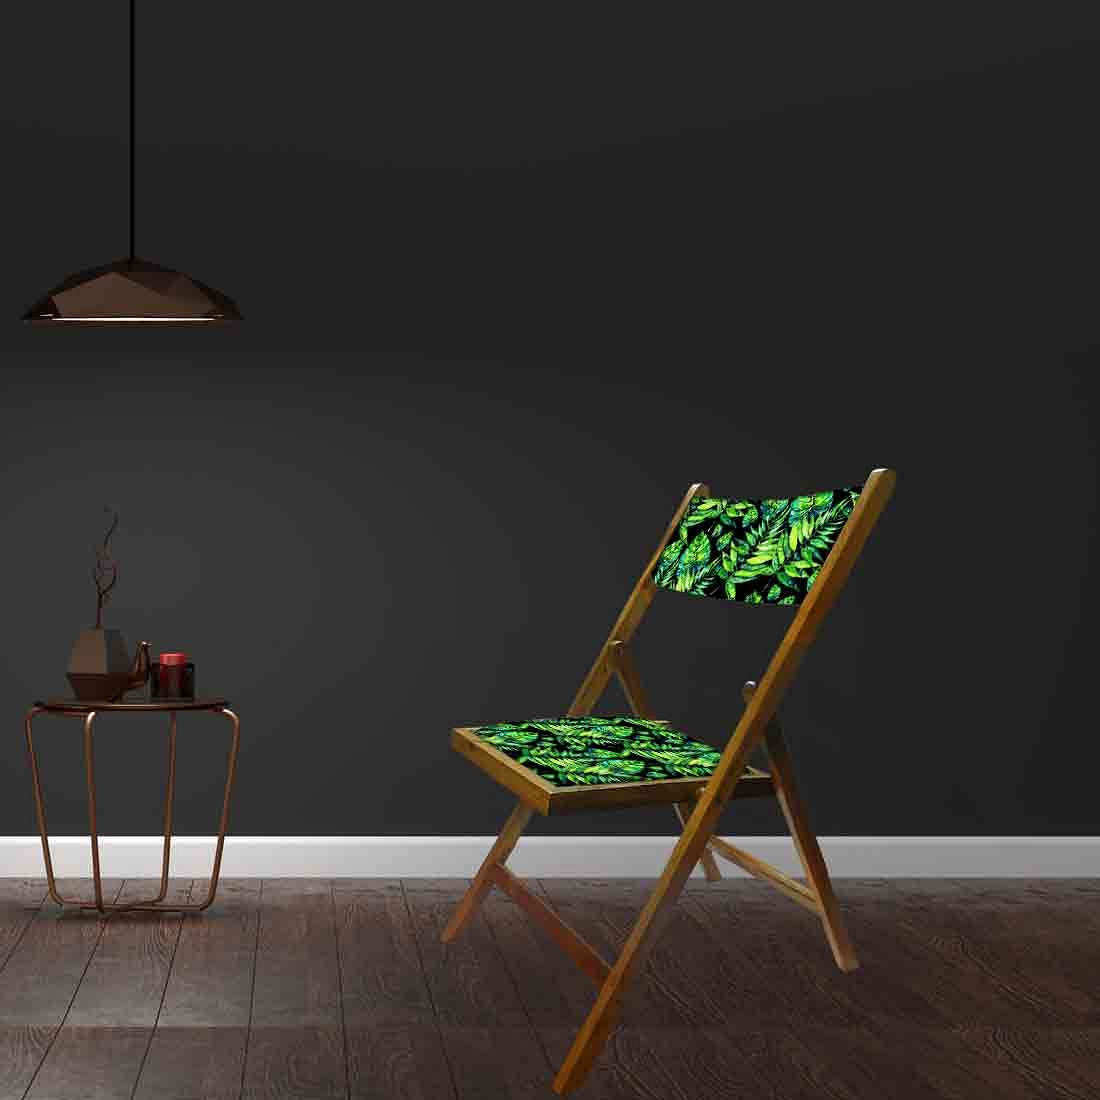 Nutcase Wooden Folding Chair for adults  -  Light Green Tropical Leaves Nutcase